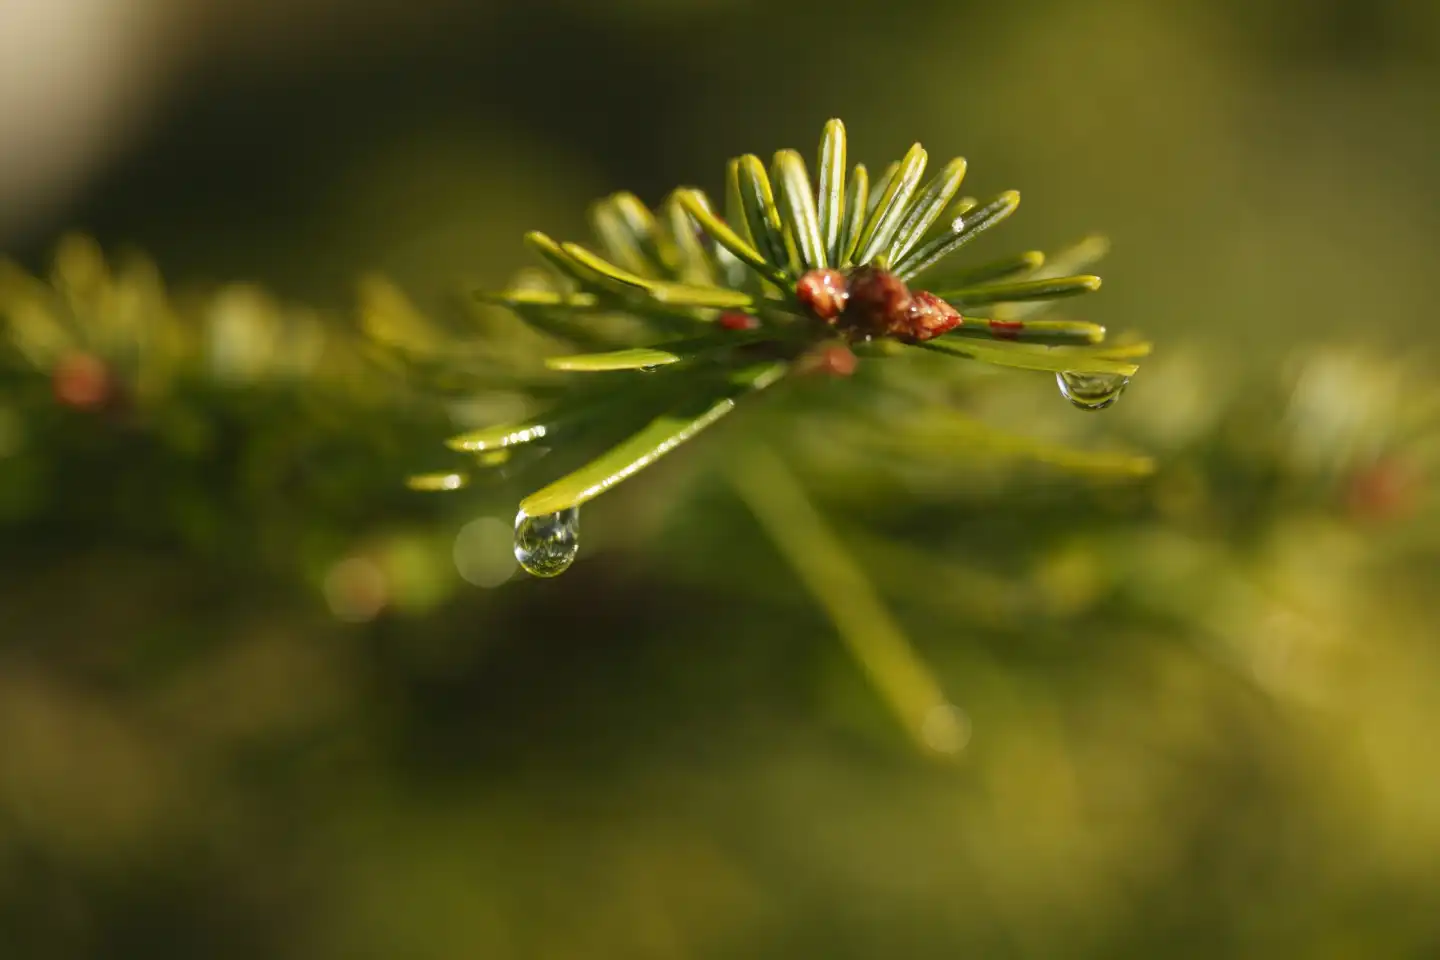 Raindrops on a conifer branch